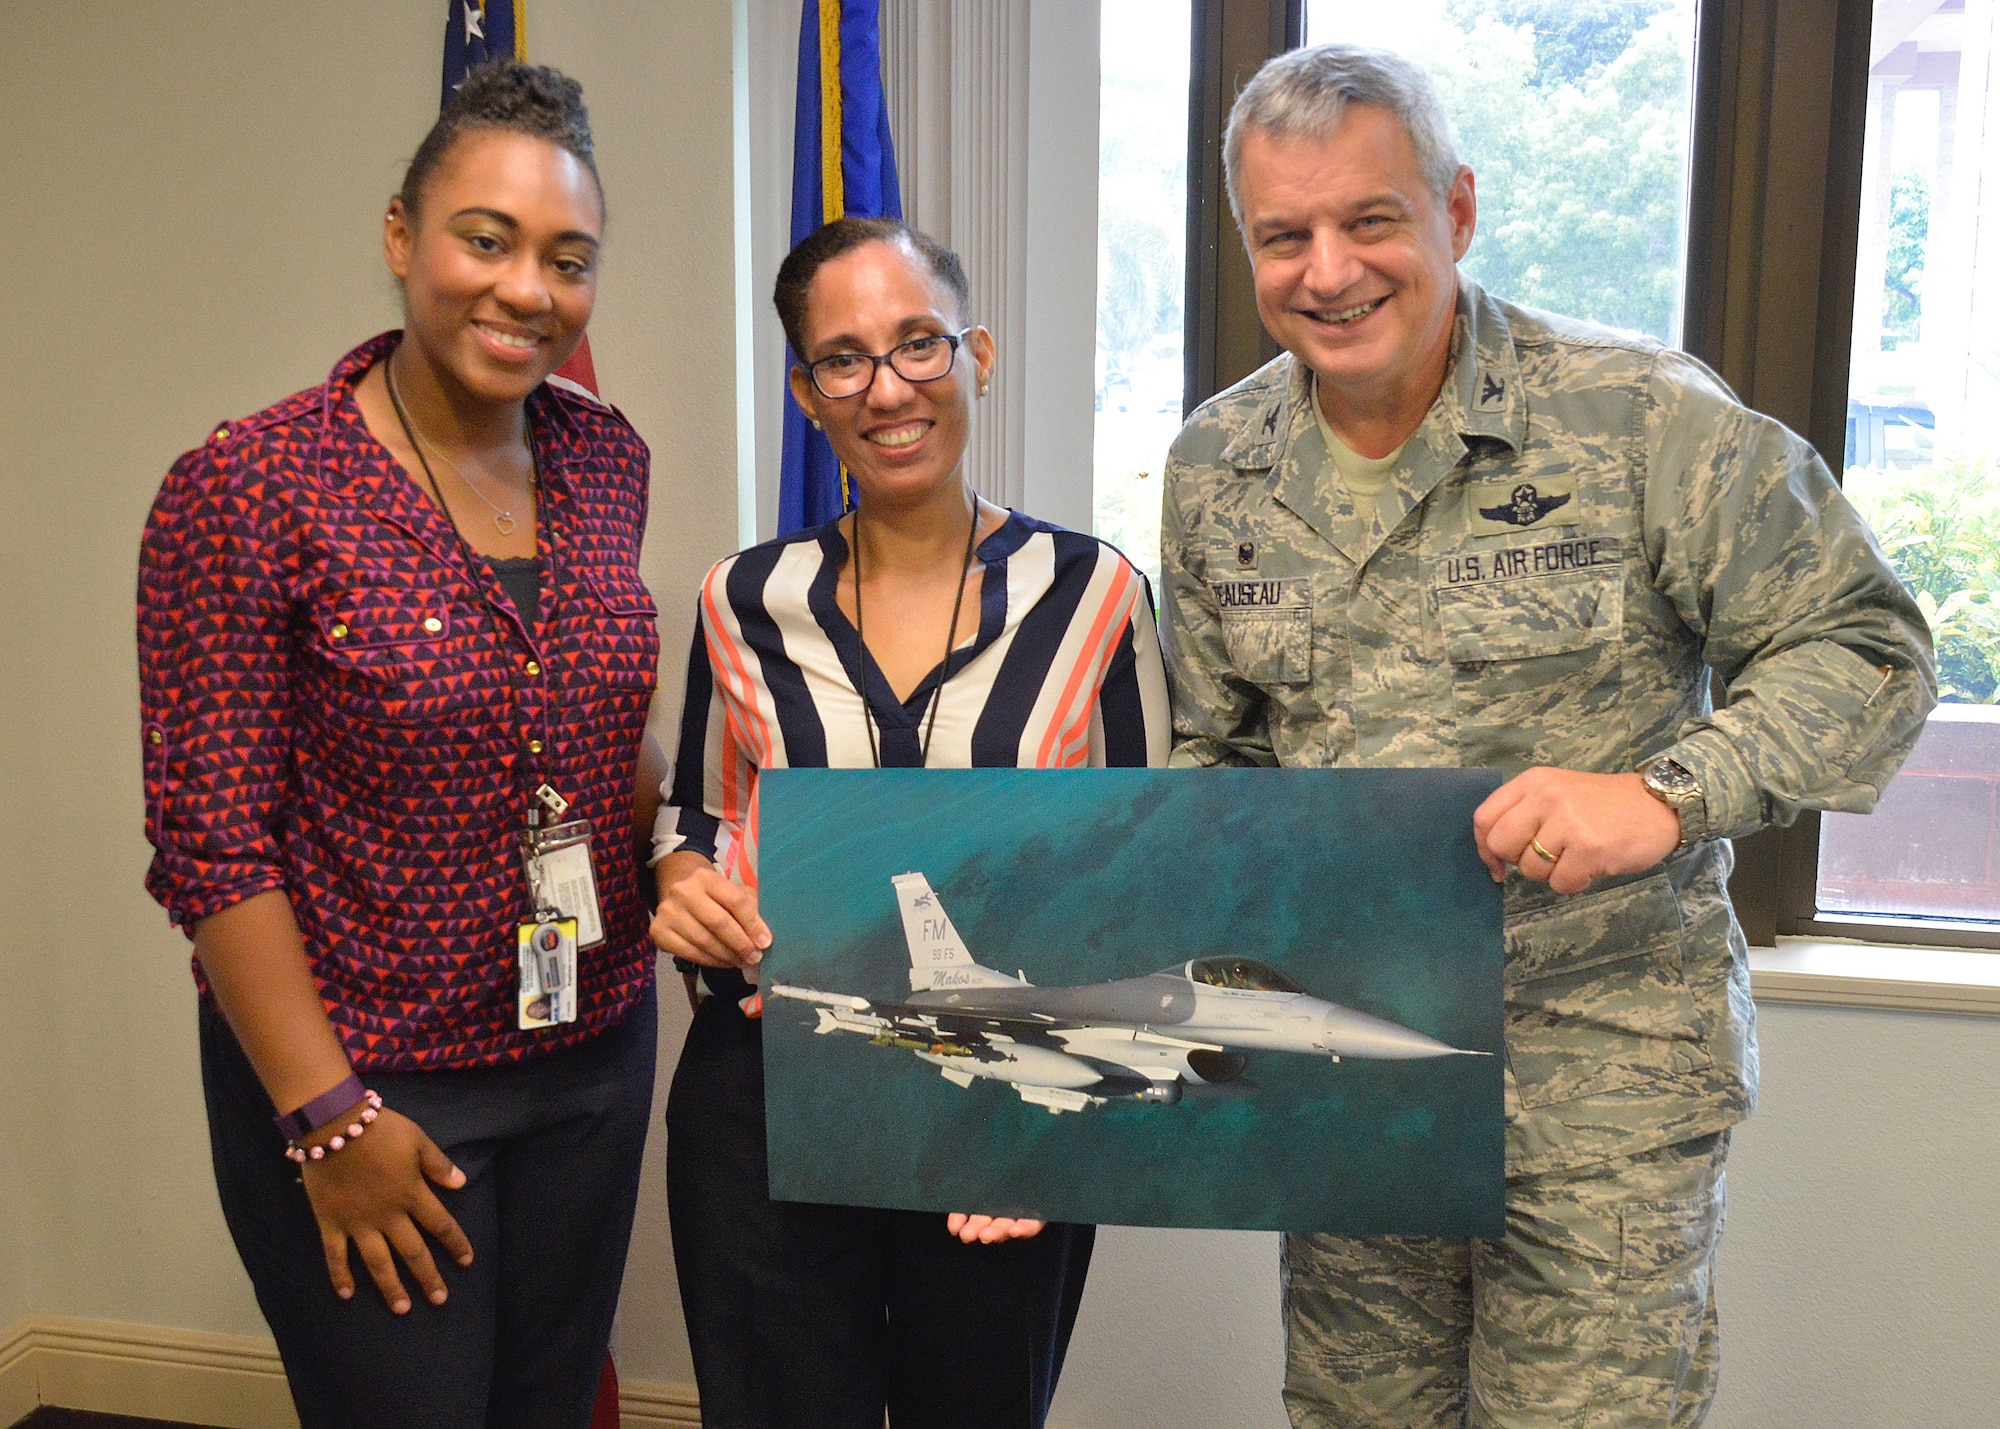 Col. Alan Teauseau, 482nd Mission Support Group commander, presents a Fighter Falcon image to Brittney Odom and Carmen Roman visitors from The Center for Disease Control and Prevention Miami Quarantine station at Homestead Air Reserve Base, Fla., Sept. 26. The station’s jurisdiction includes the preclearance ports in Florida, Mississippi, Alabama, the Bahamas and Aruba. (U.S. Air Force photo by Staff Sgt. Desiree W. Moye)